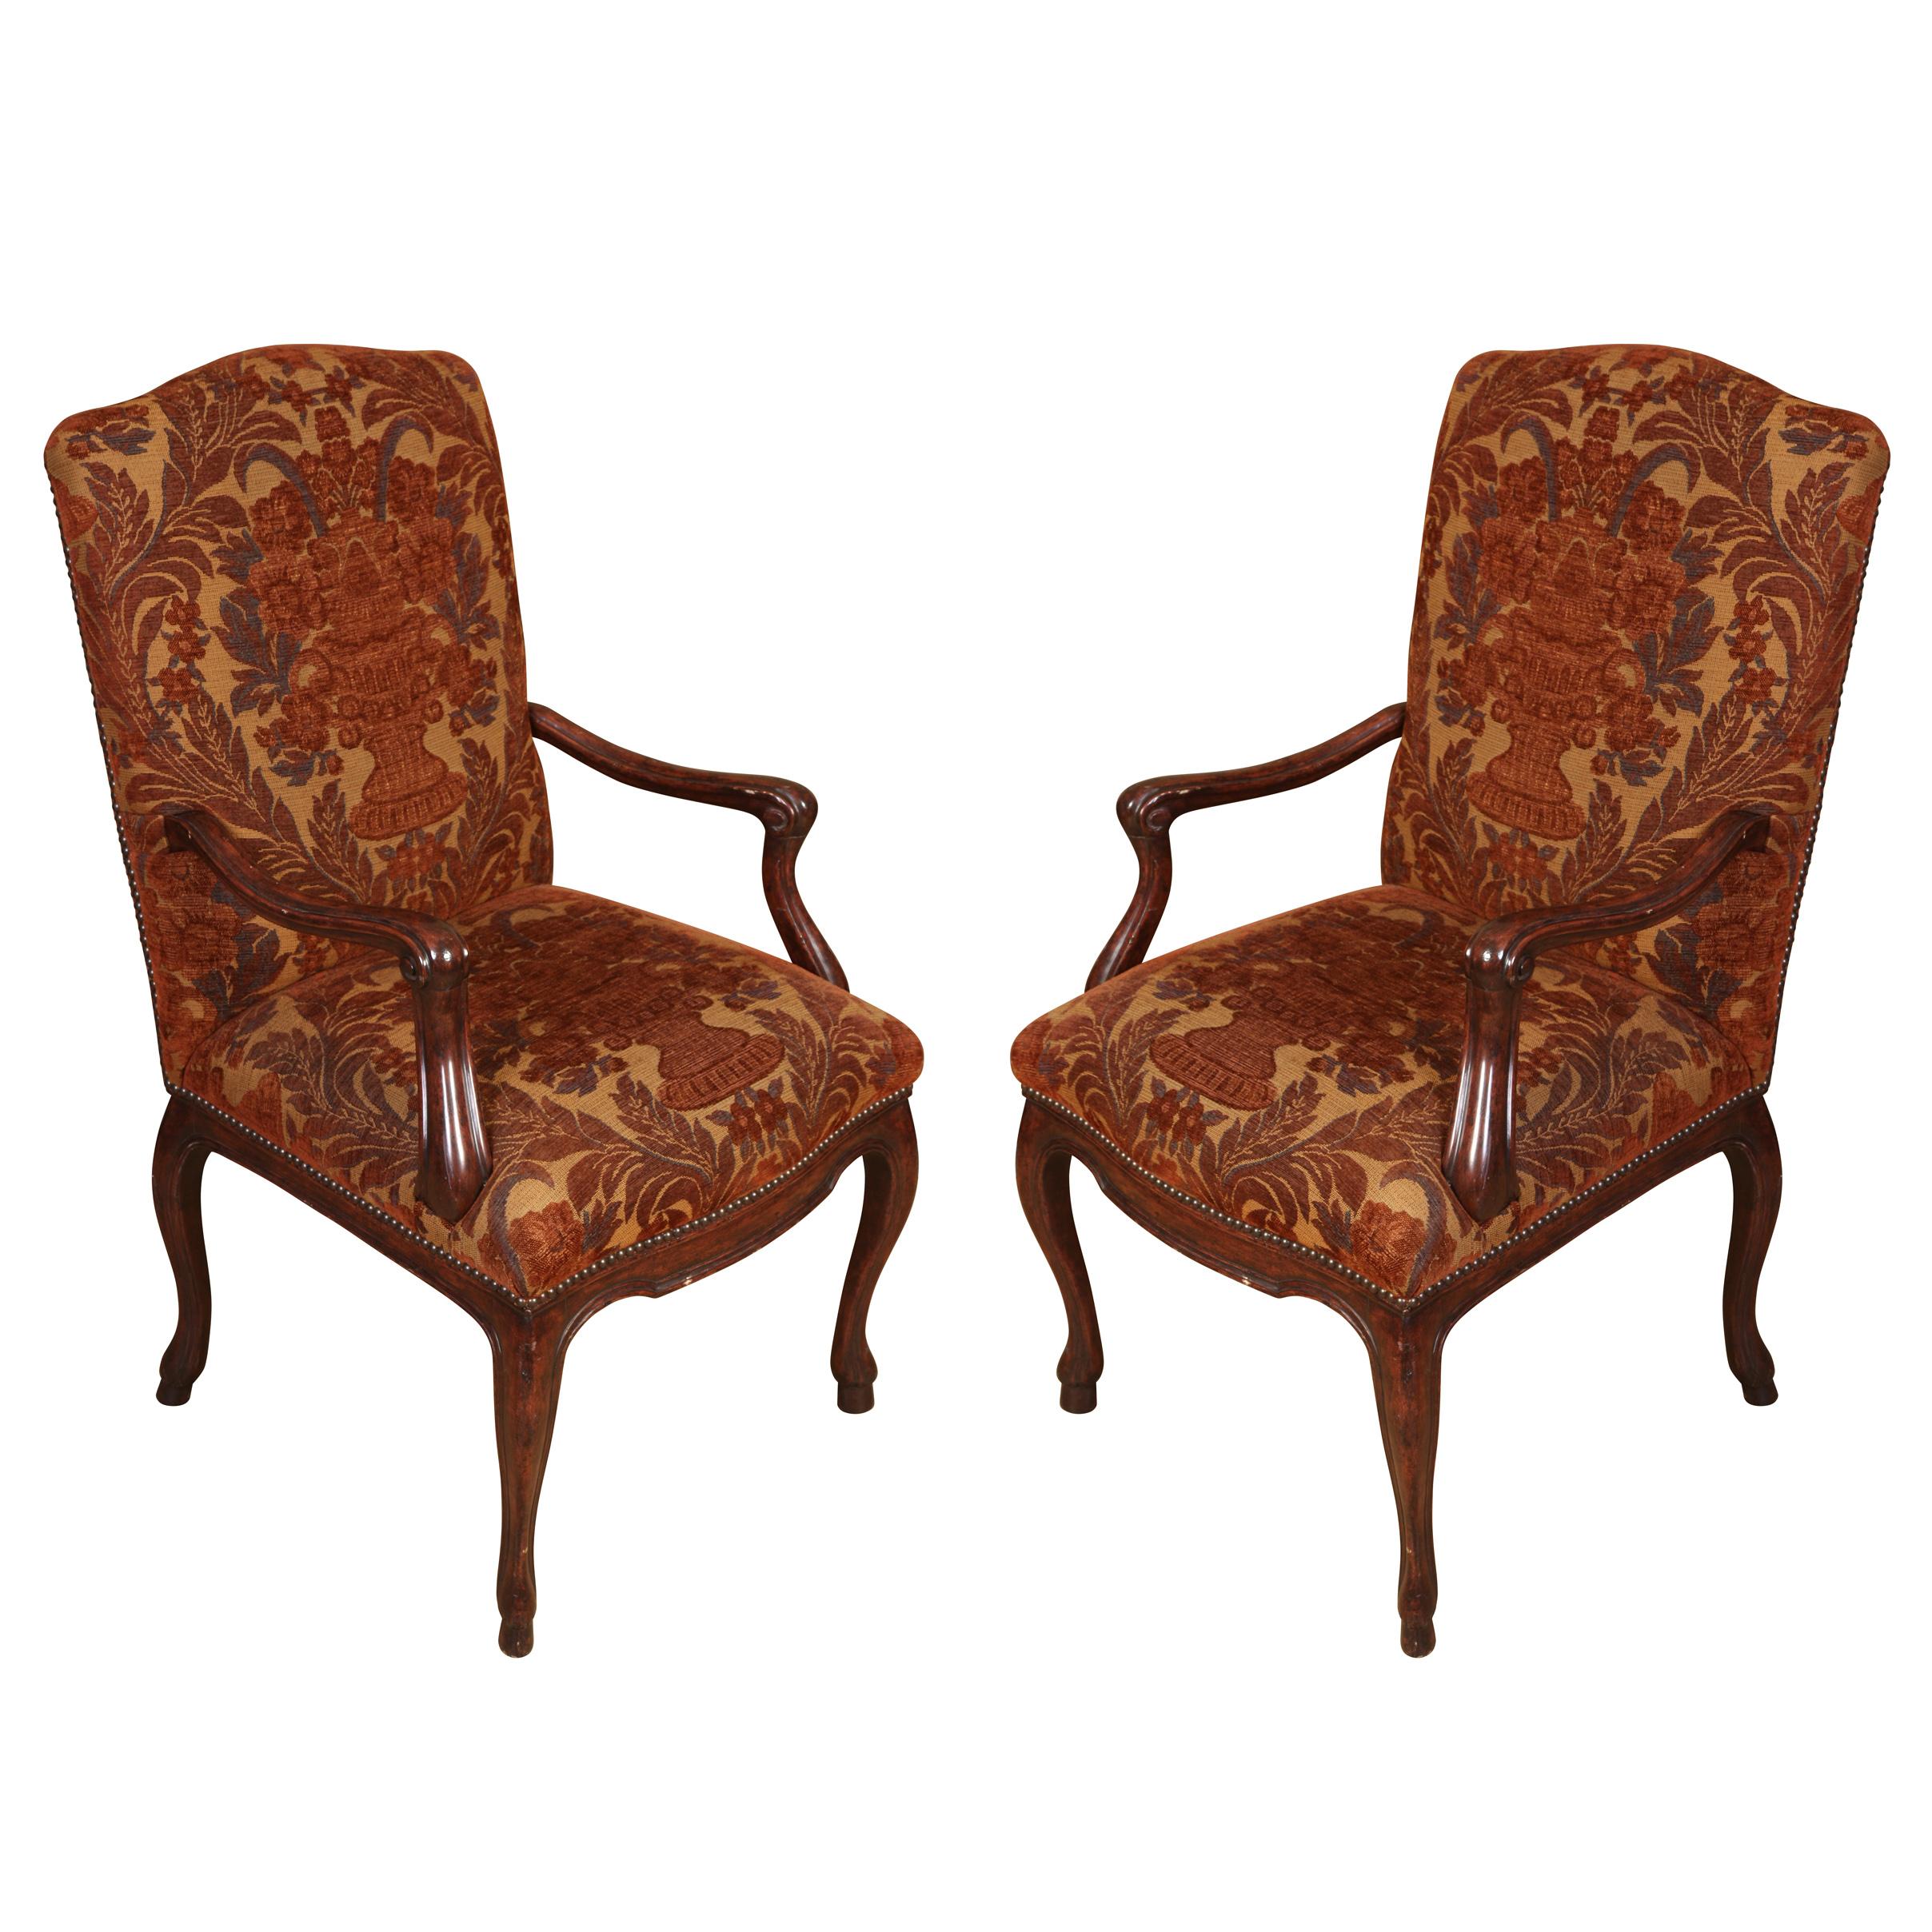 Set of Ten Vintage Michael Taylor Dining Chairs with Cranberry Brocade Fabric In Good Condition For Sale In Locust Valley, NY